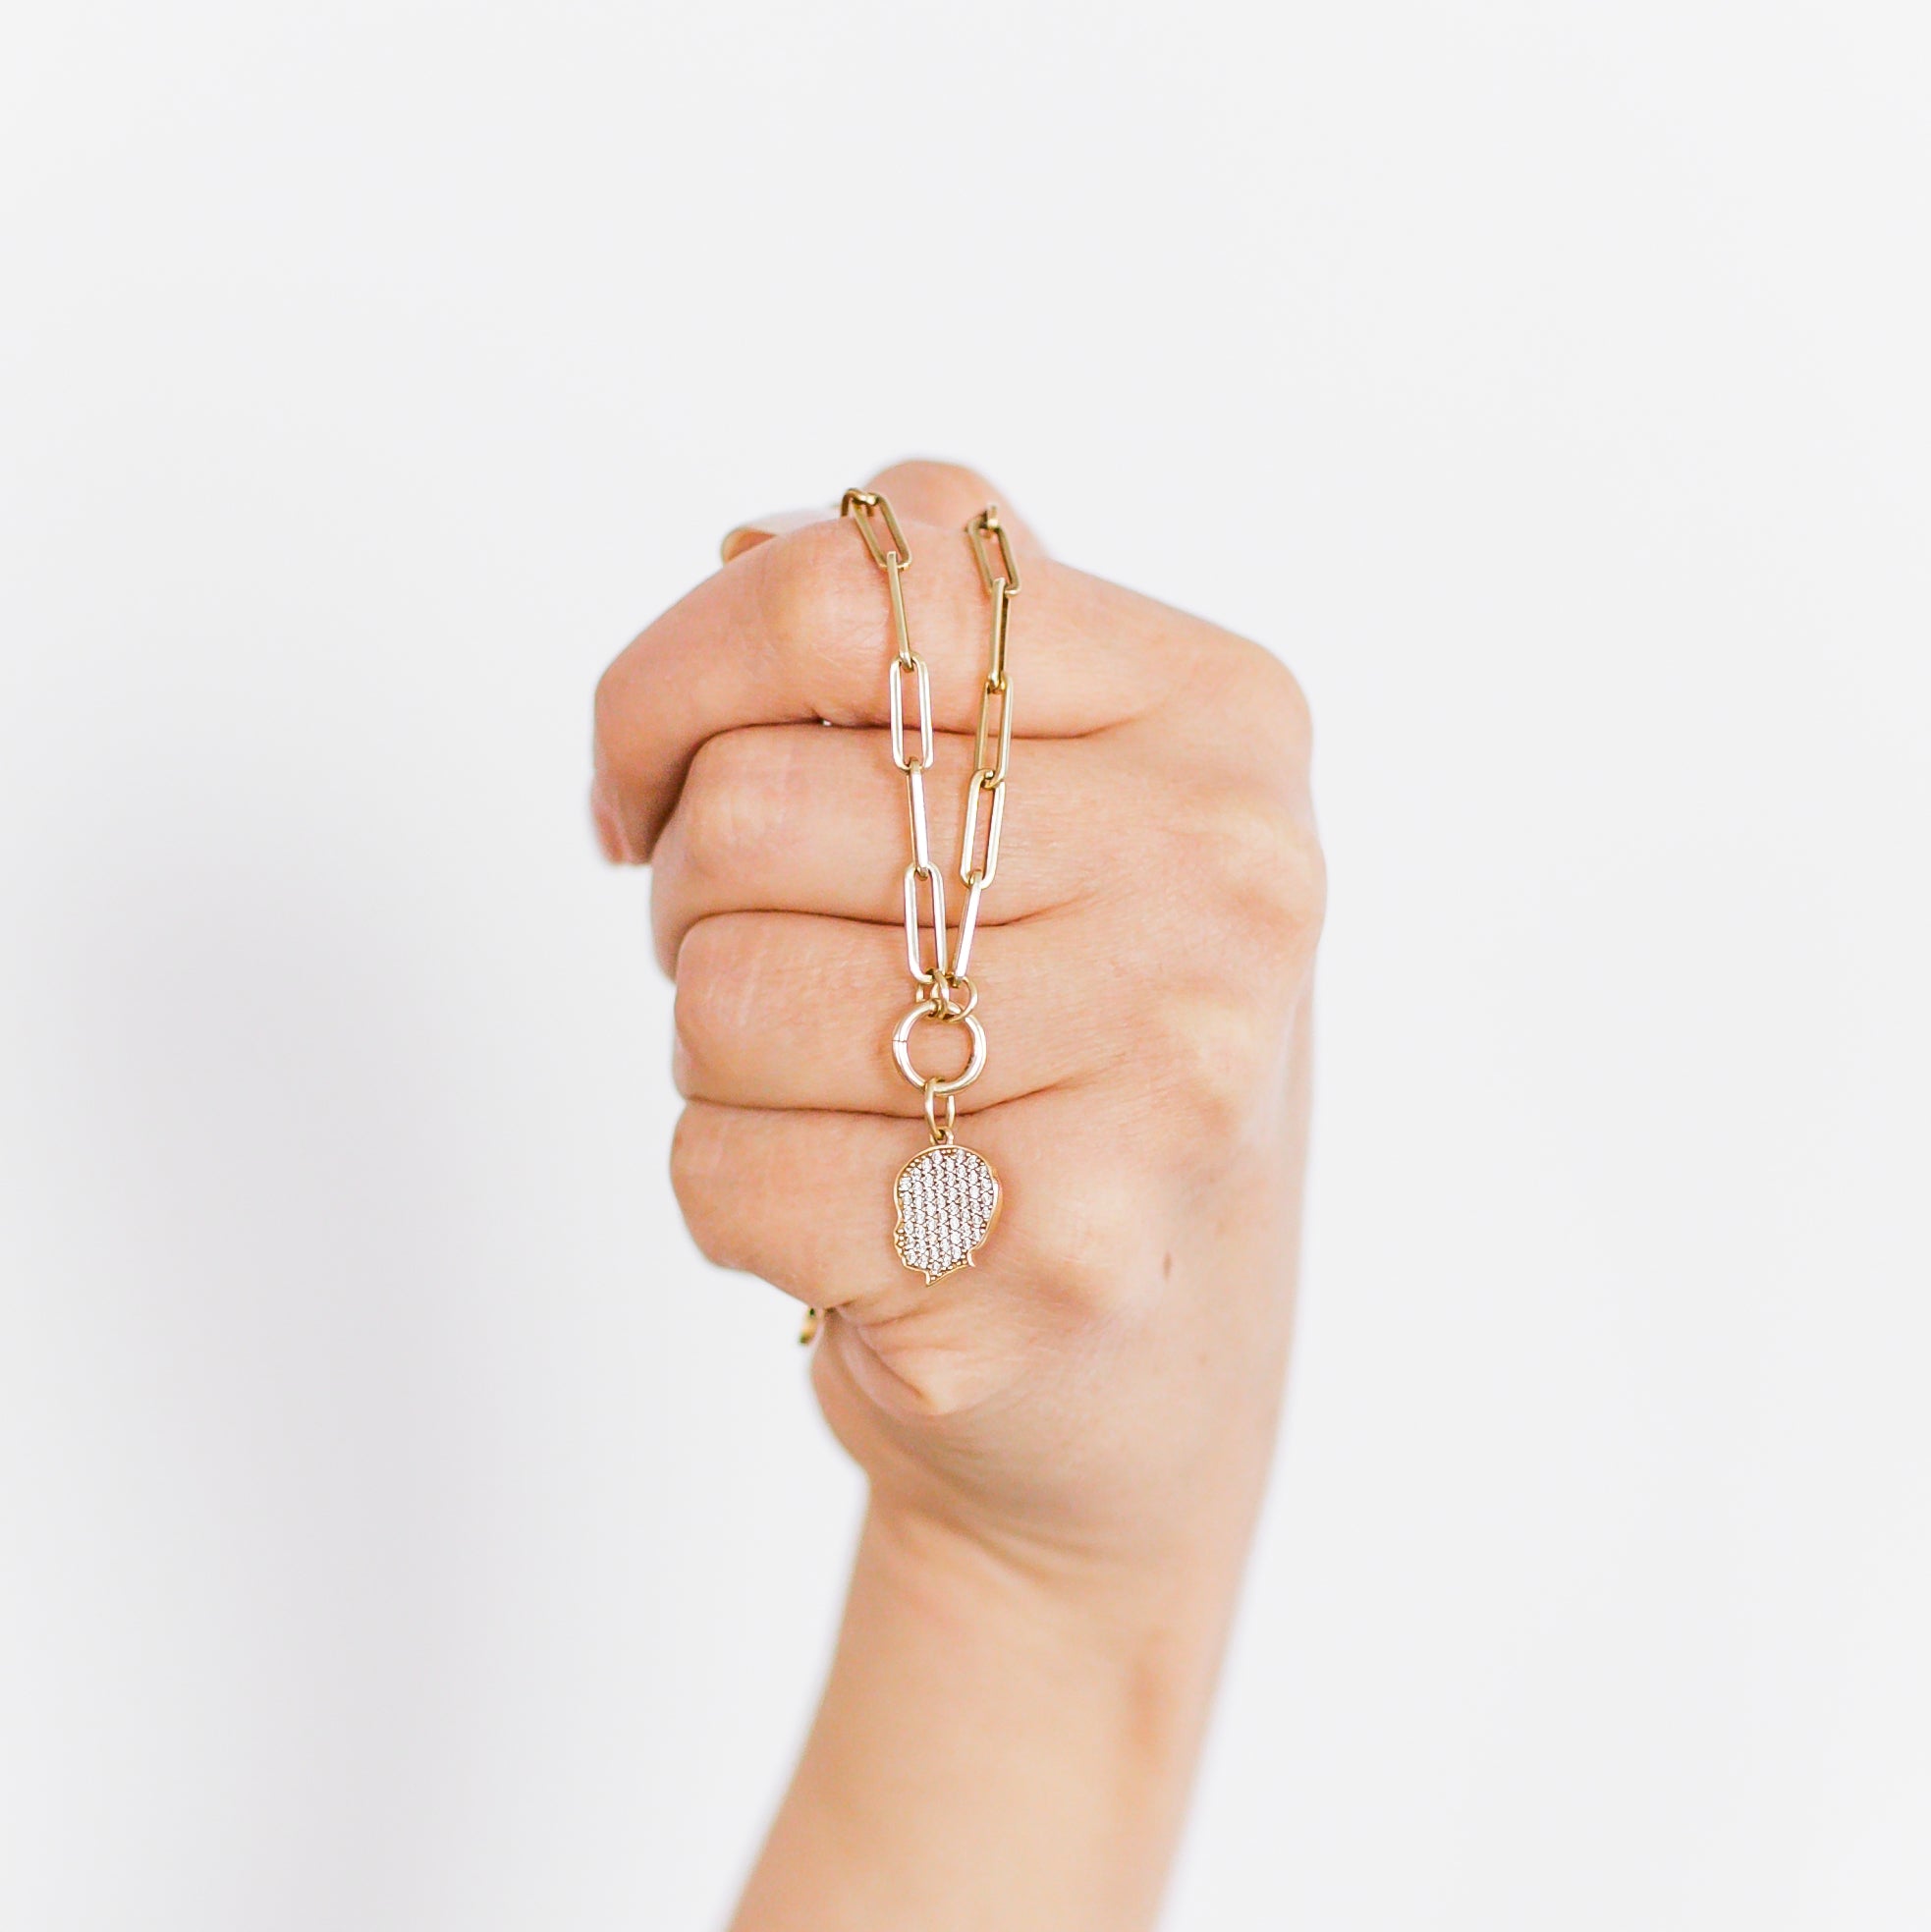 Pave Diamond Silhouette Charm on Paper Clip Chain Necklace